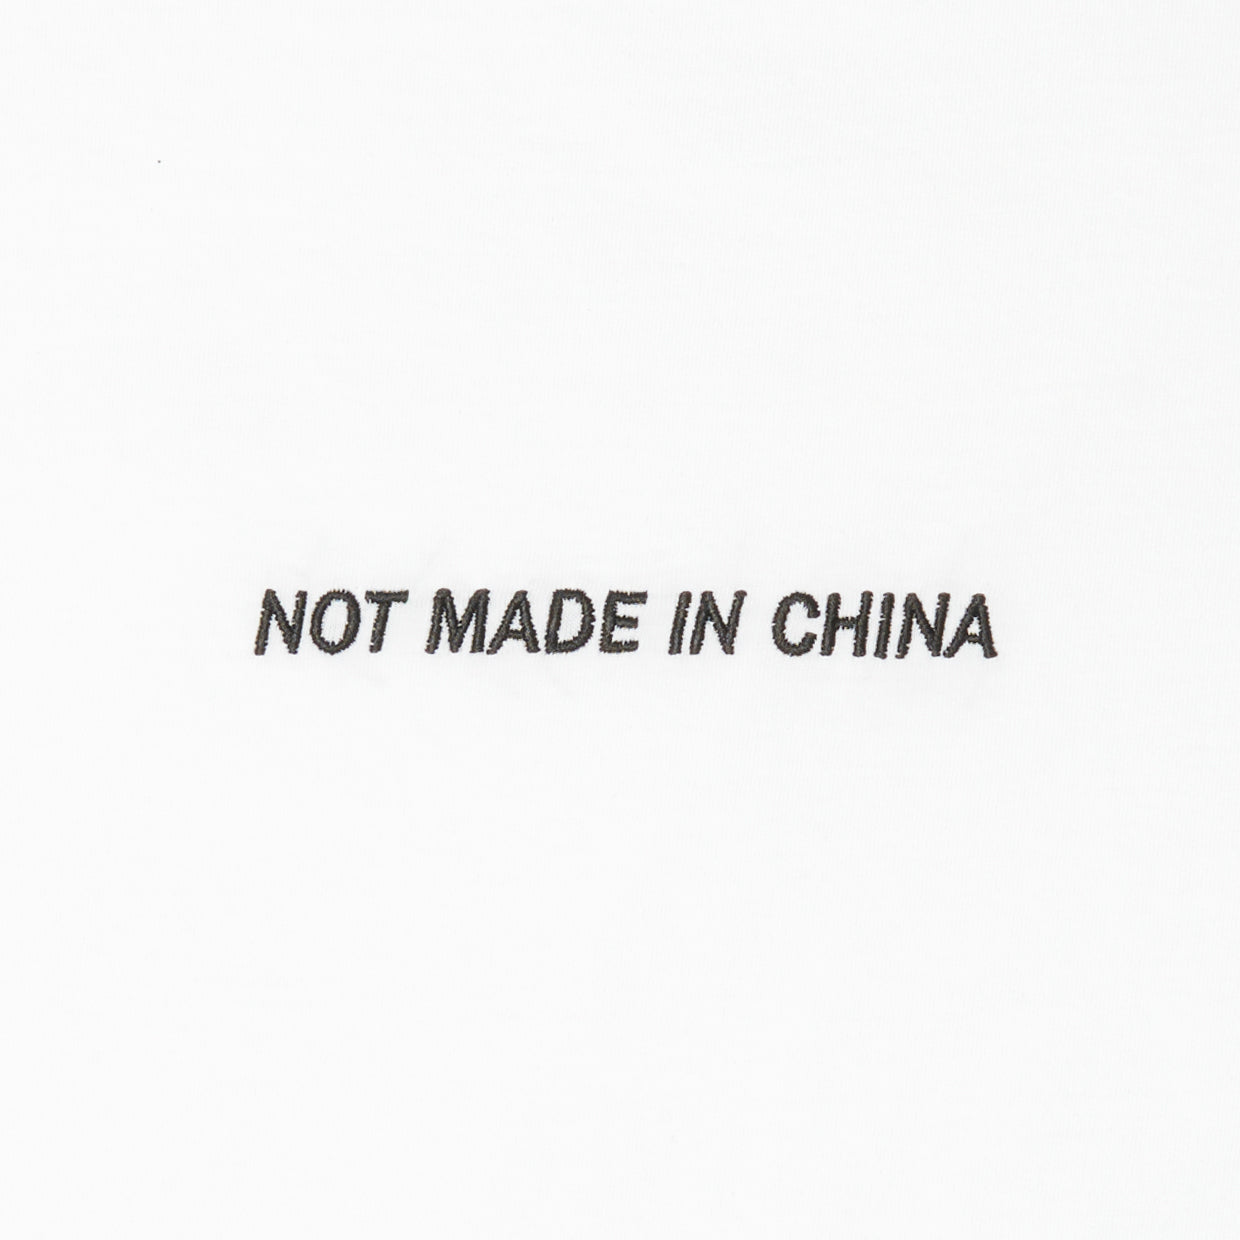 The "Not Made in China" T-Shirt